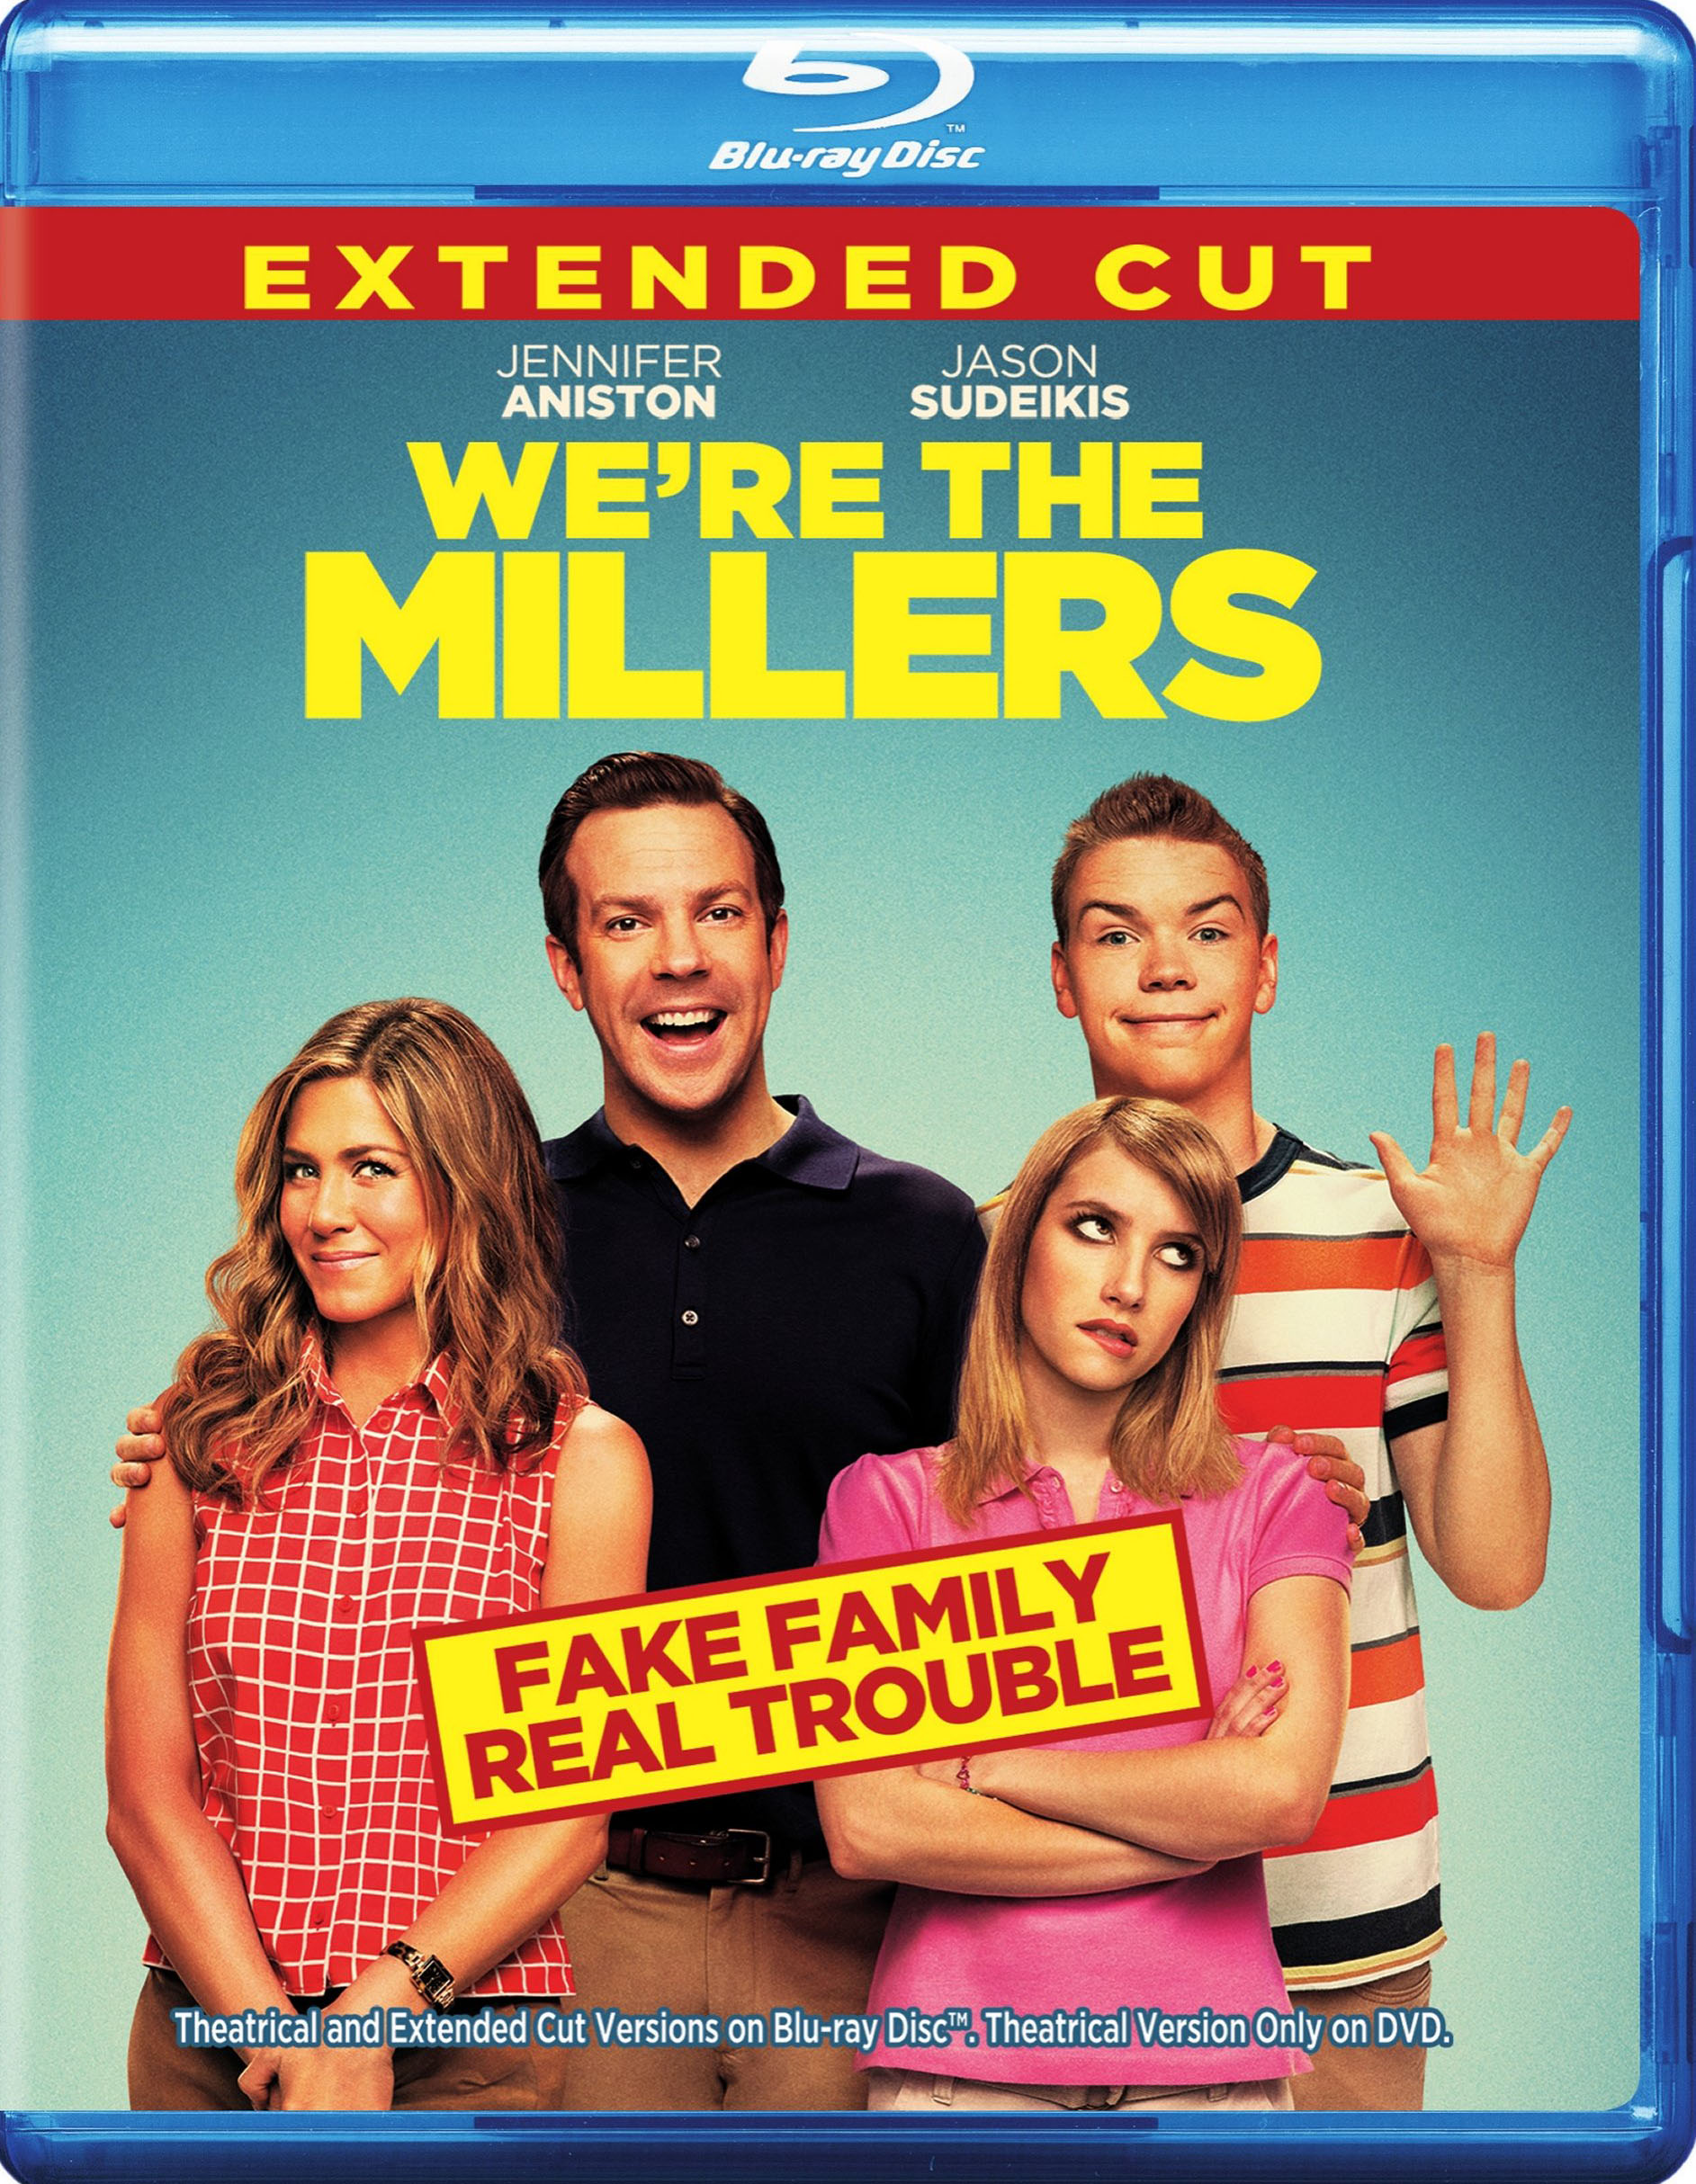 Laura leigh were the millers role